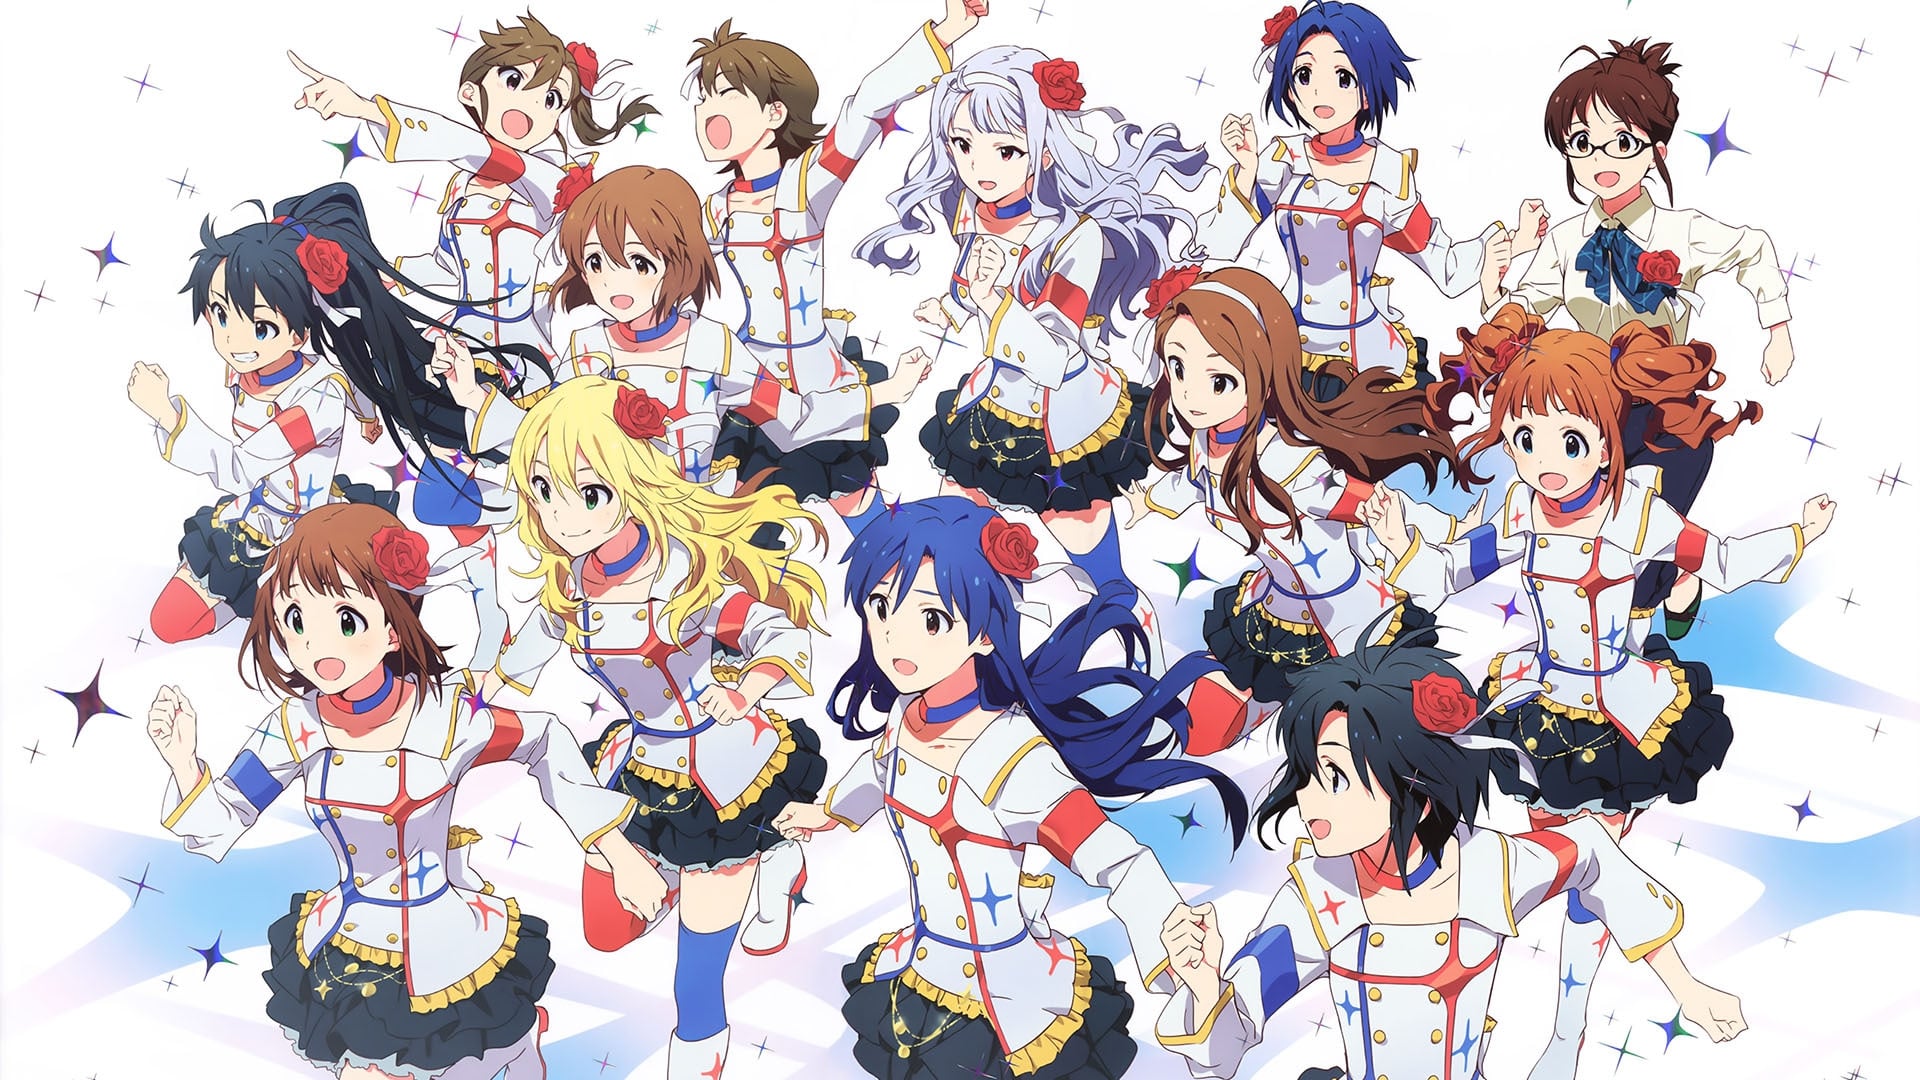 iDOLM@STER MOVIE - Beyond the Brilliant Future!